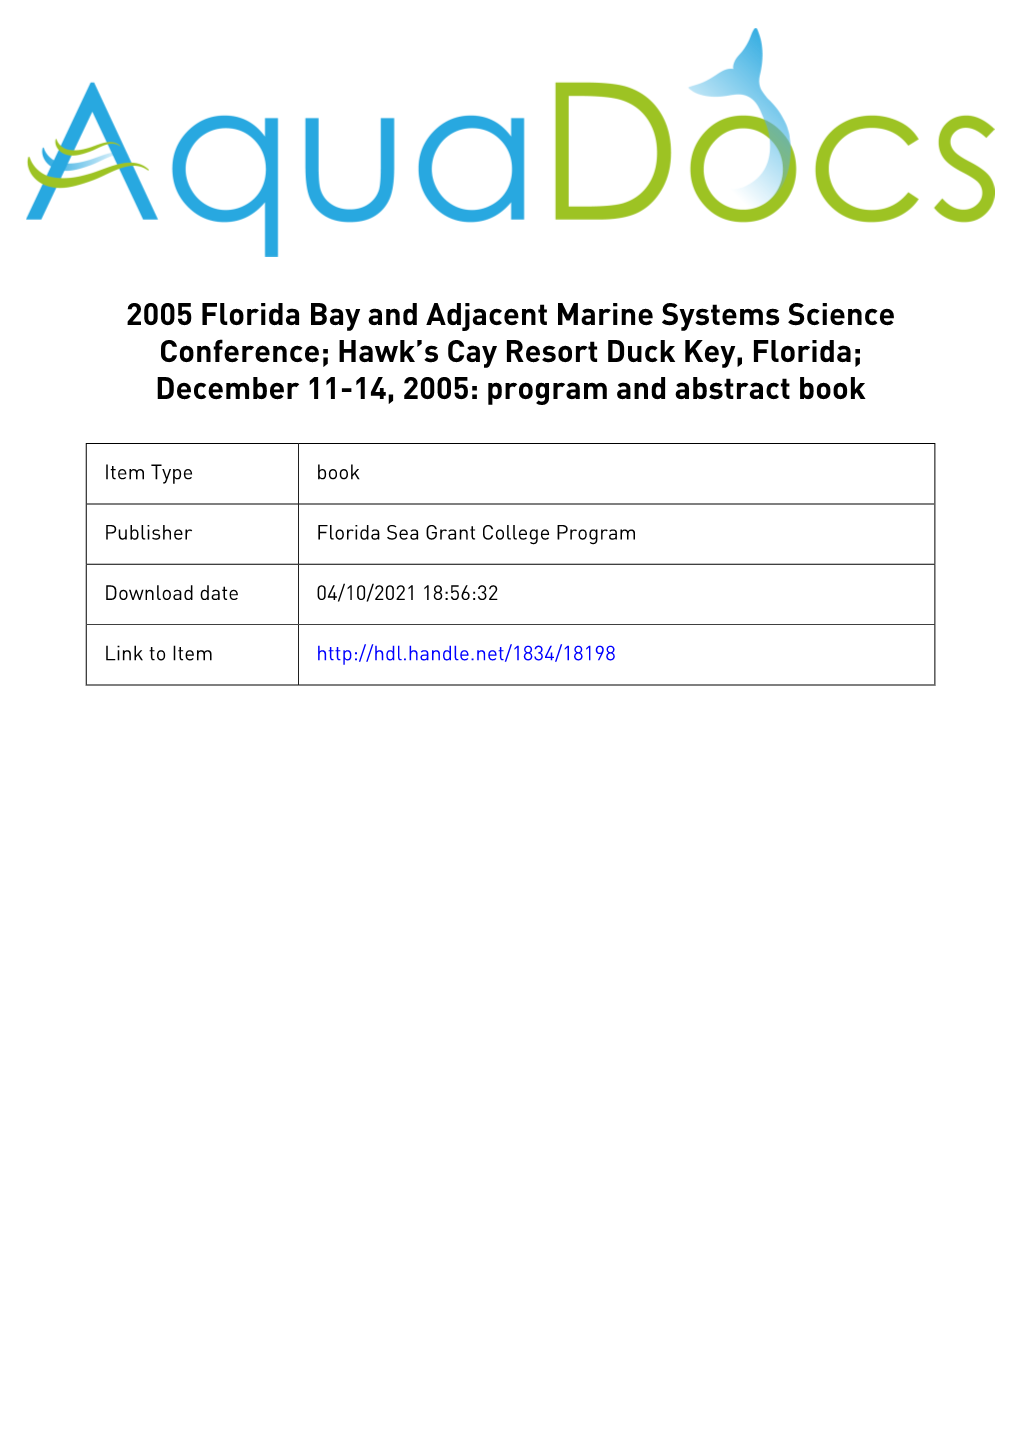 2005 Florida Bay and Adjacent Marine Systems Science Conference; Hawk’S Cay Resort Duck Key, Florida; December 11-14, 2005: Program and Abstract Book